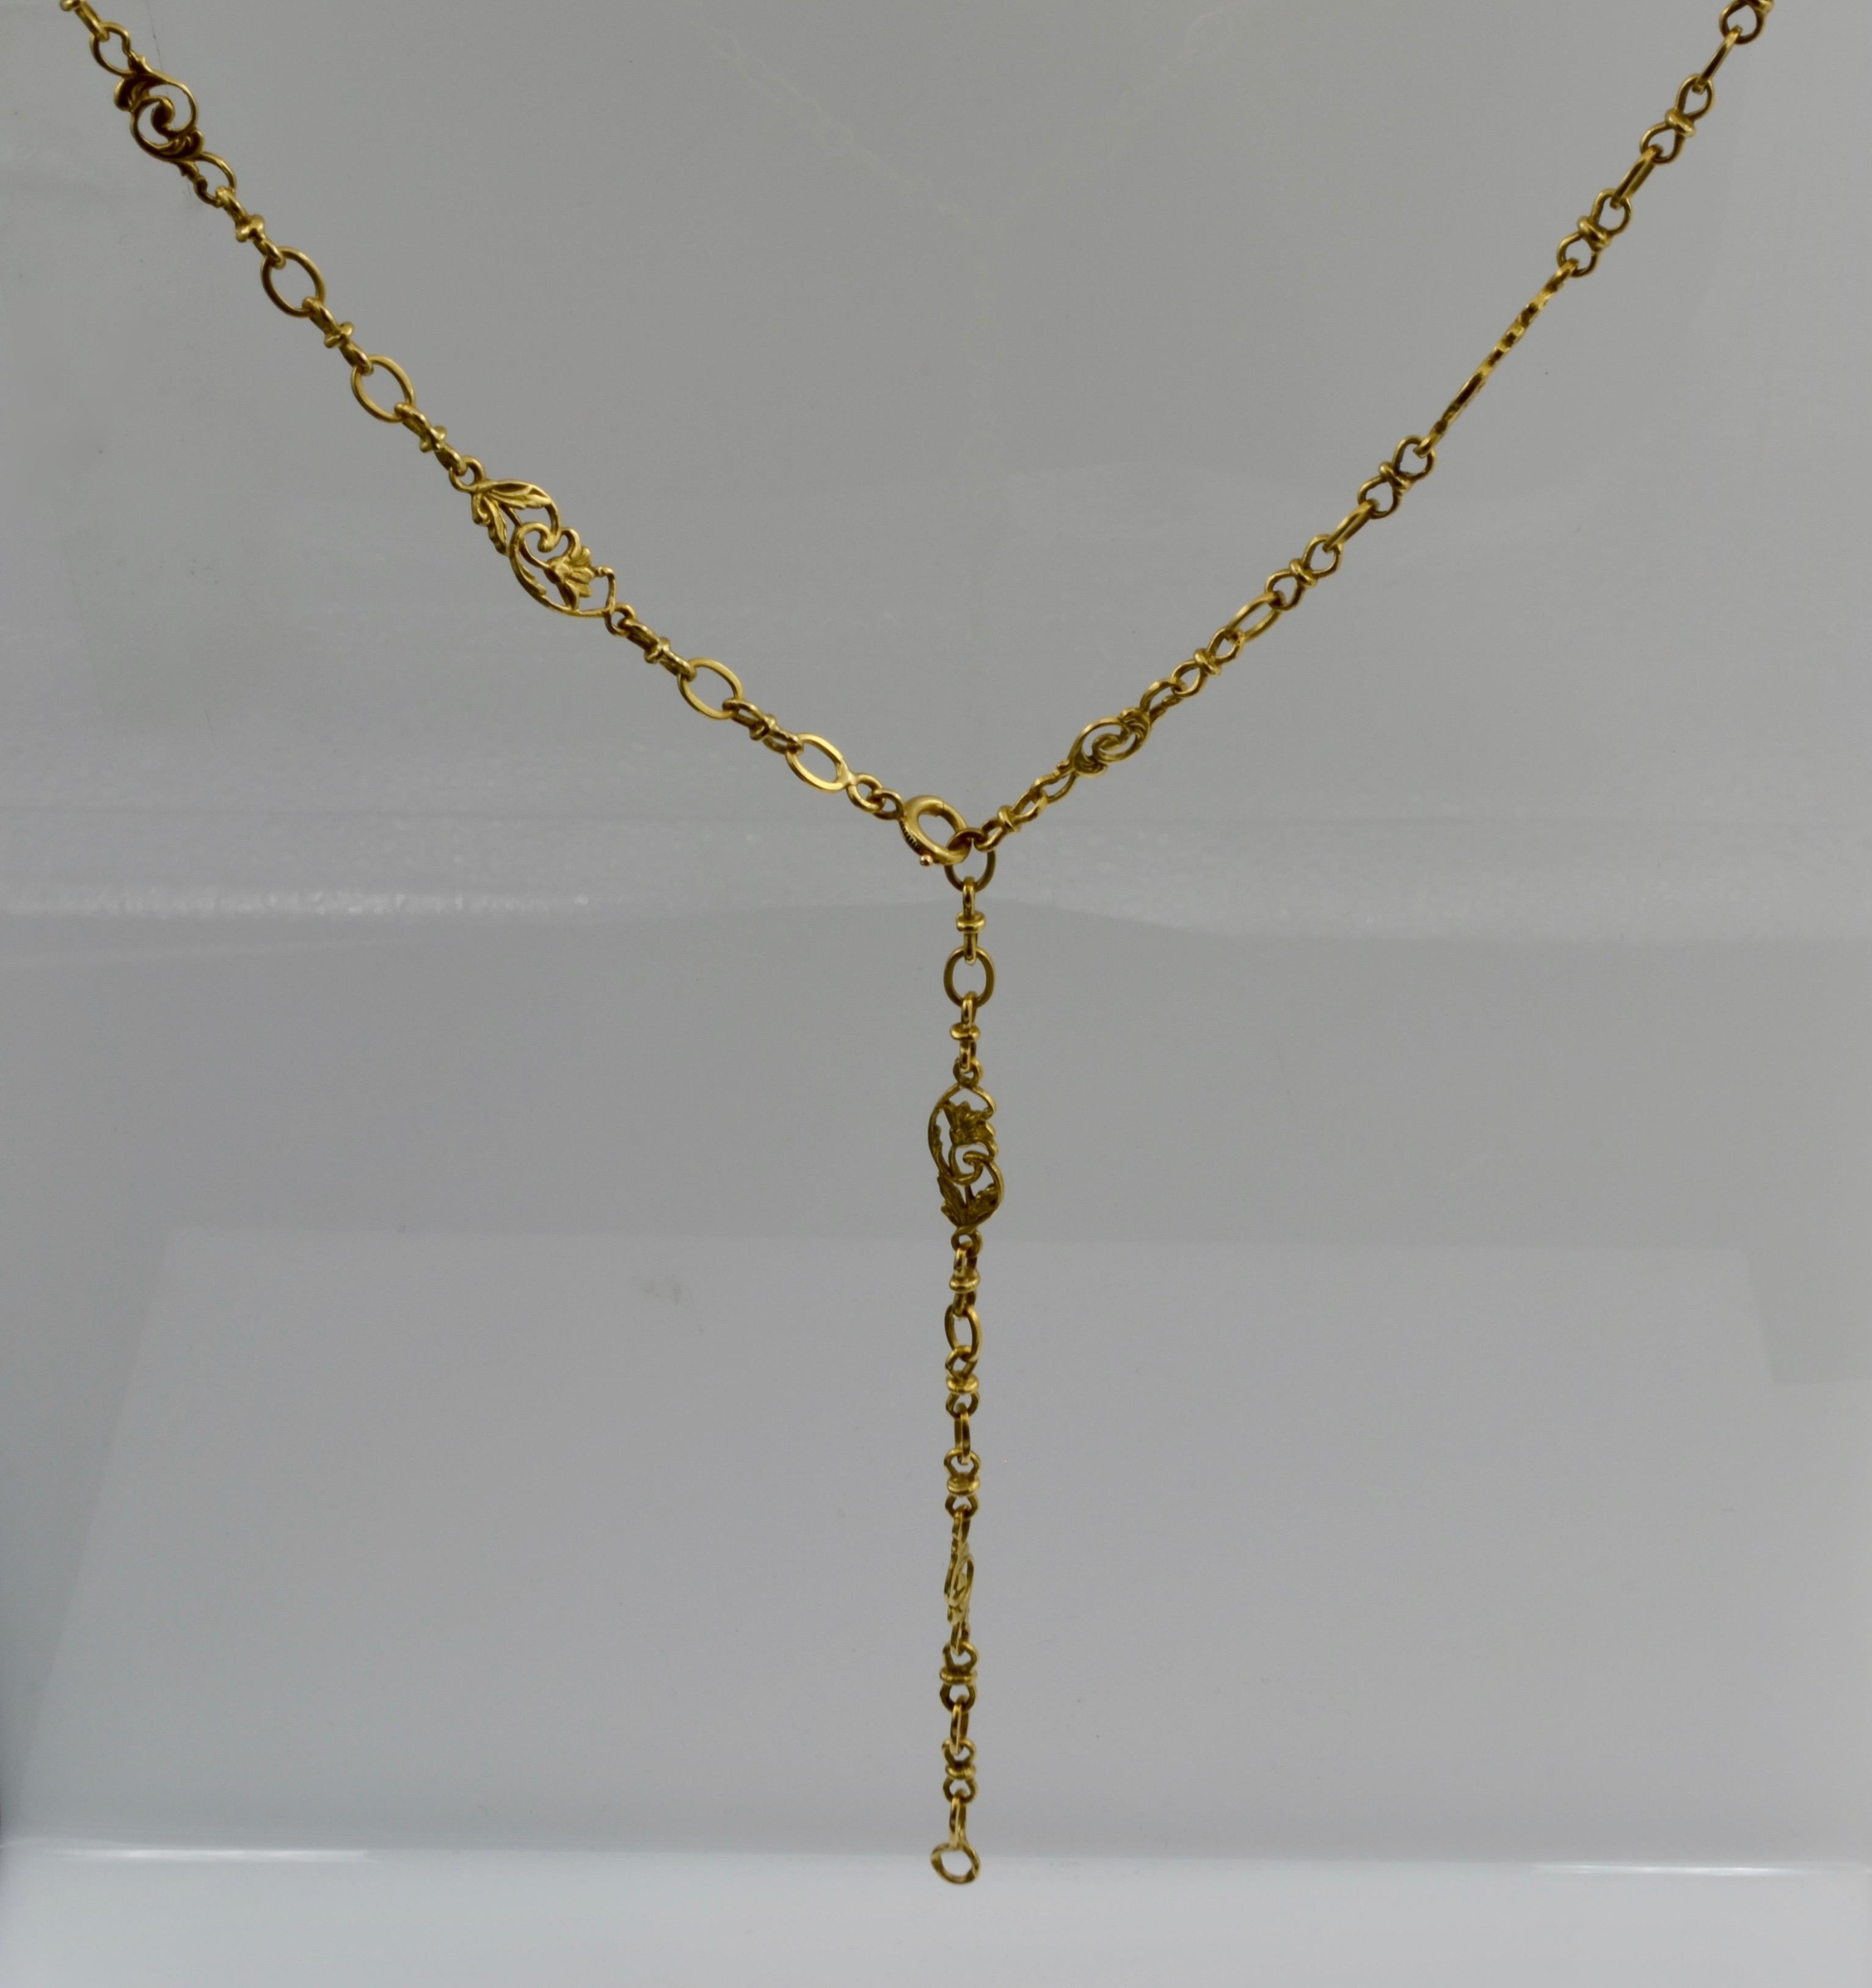 French Antique Sautoir Yellow Gold Chain Link Necklace with Lillies and Vines 3